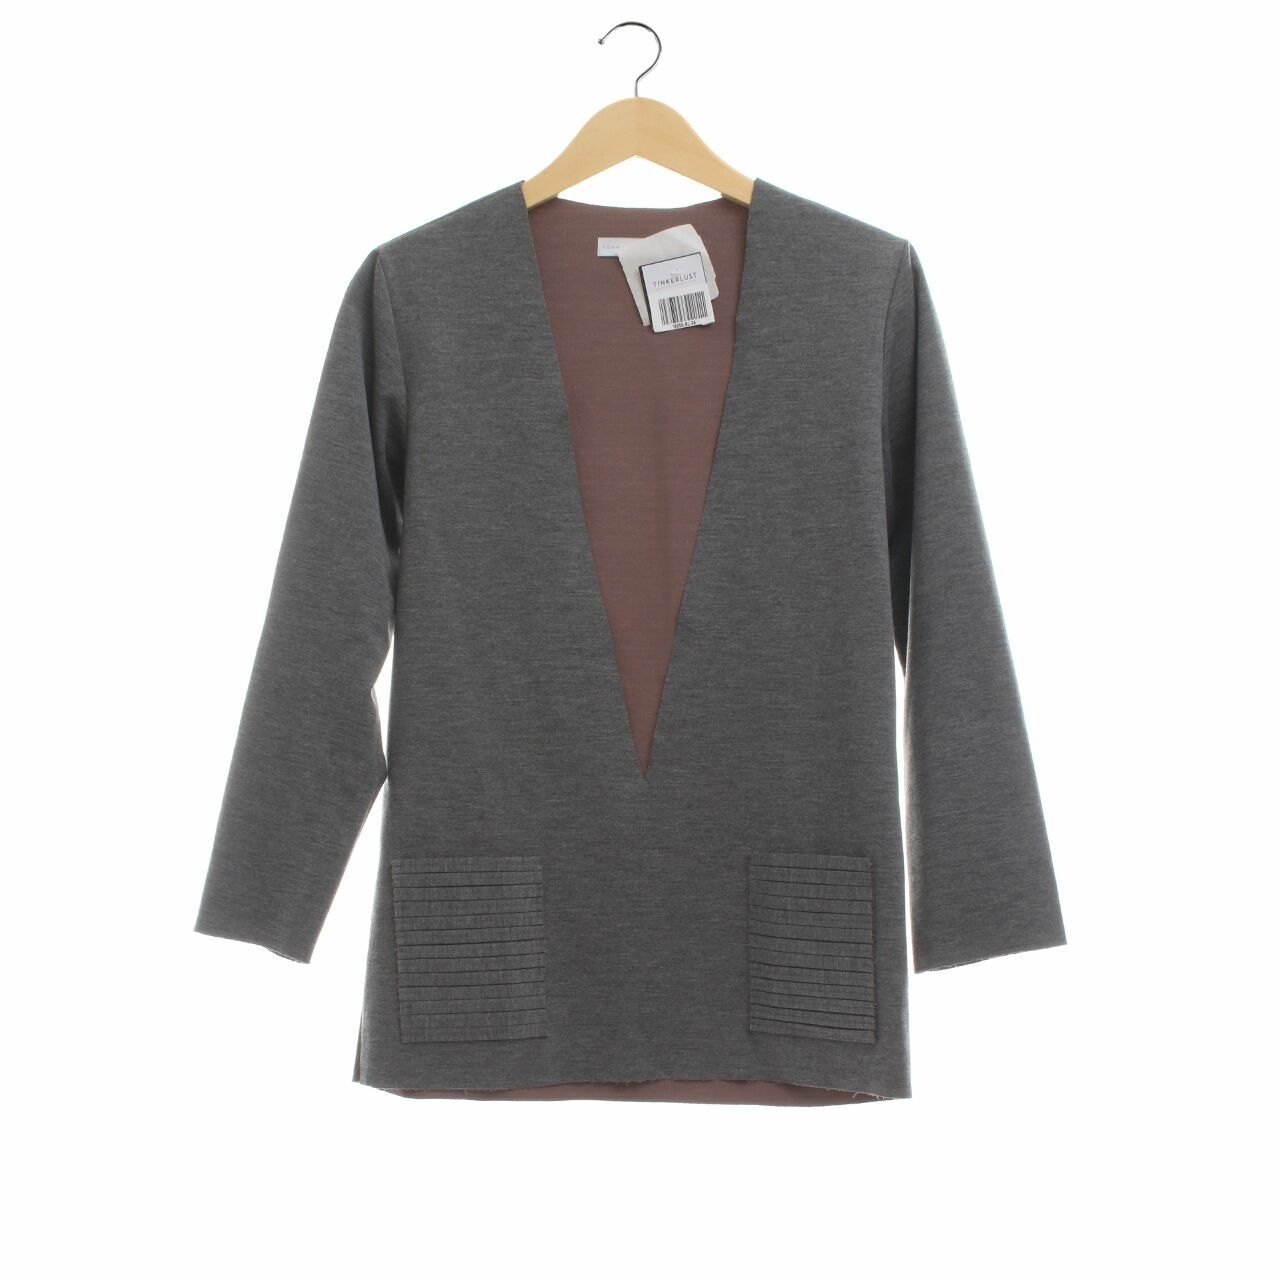 Komma Grey & Taupe Blouse